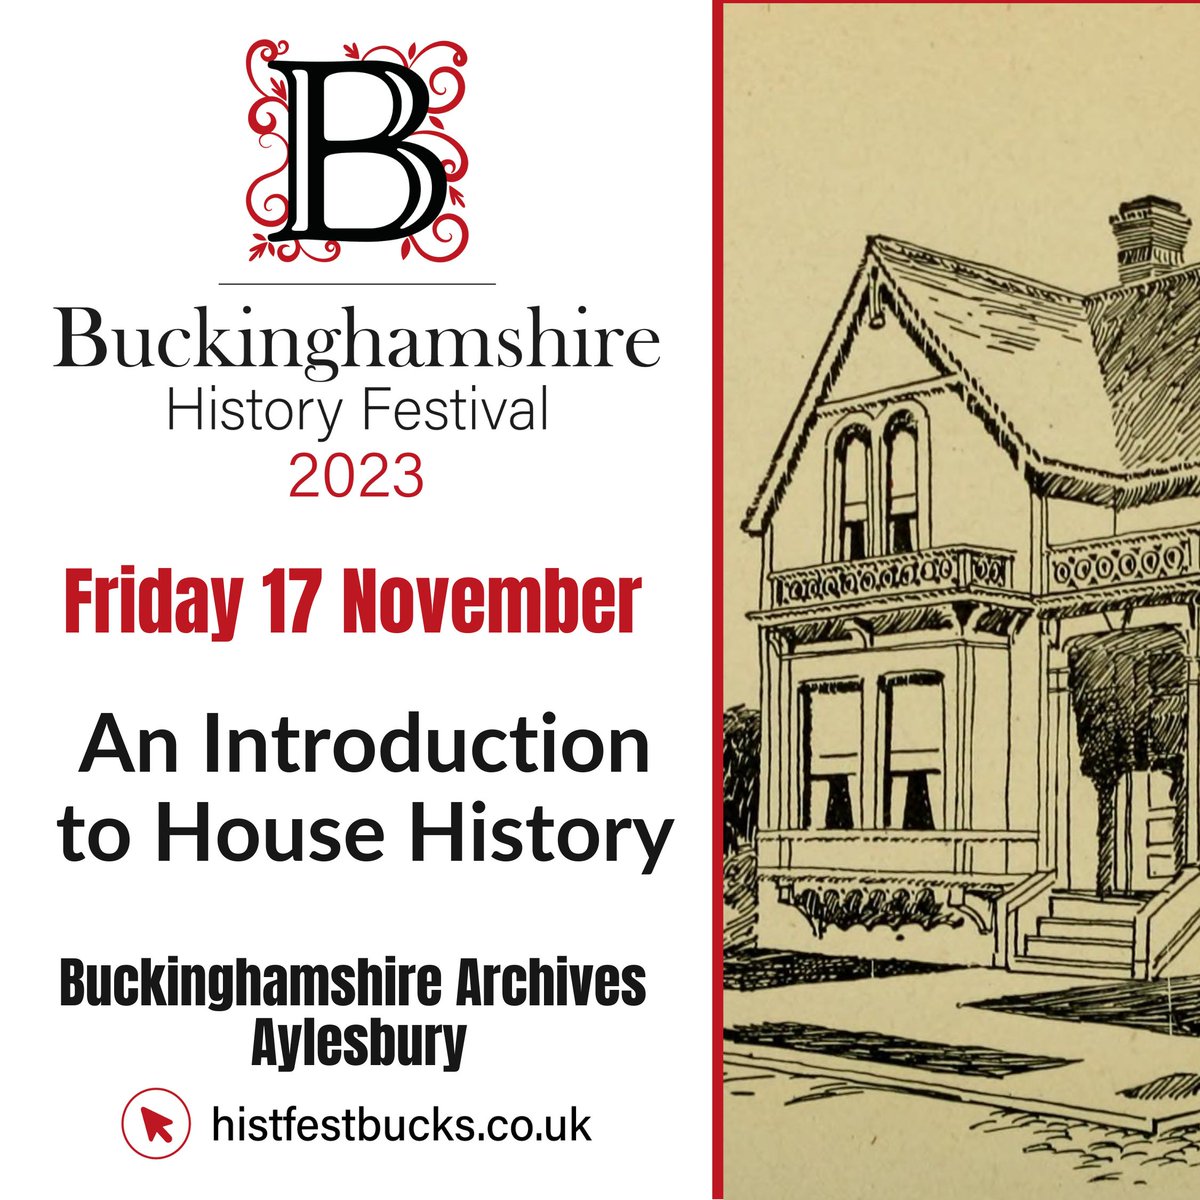 After last year's fully booked talk, we're very excited to be running another session on how to research house history! The talk will take place on the 17th of November, 10:30am at Buckinghamshire Archives. Email us at archives@buckinghamshire.gov.uk to book your place!